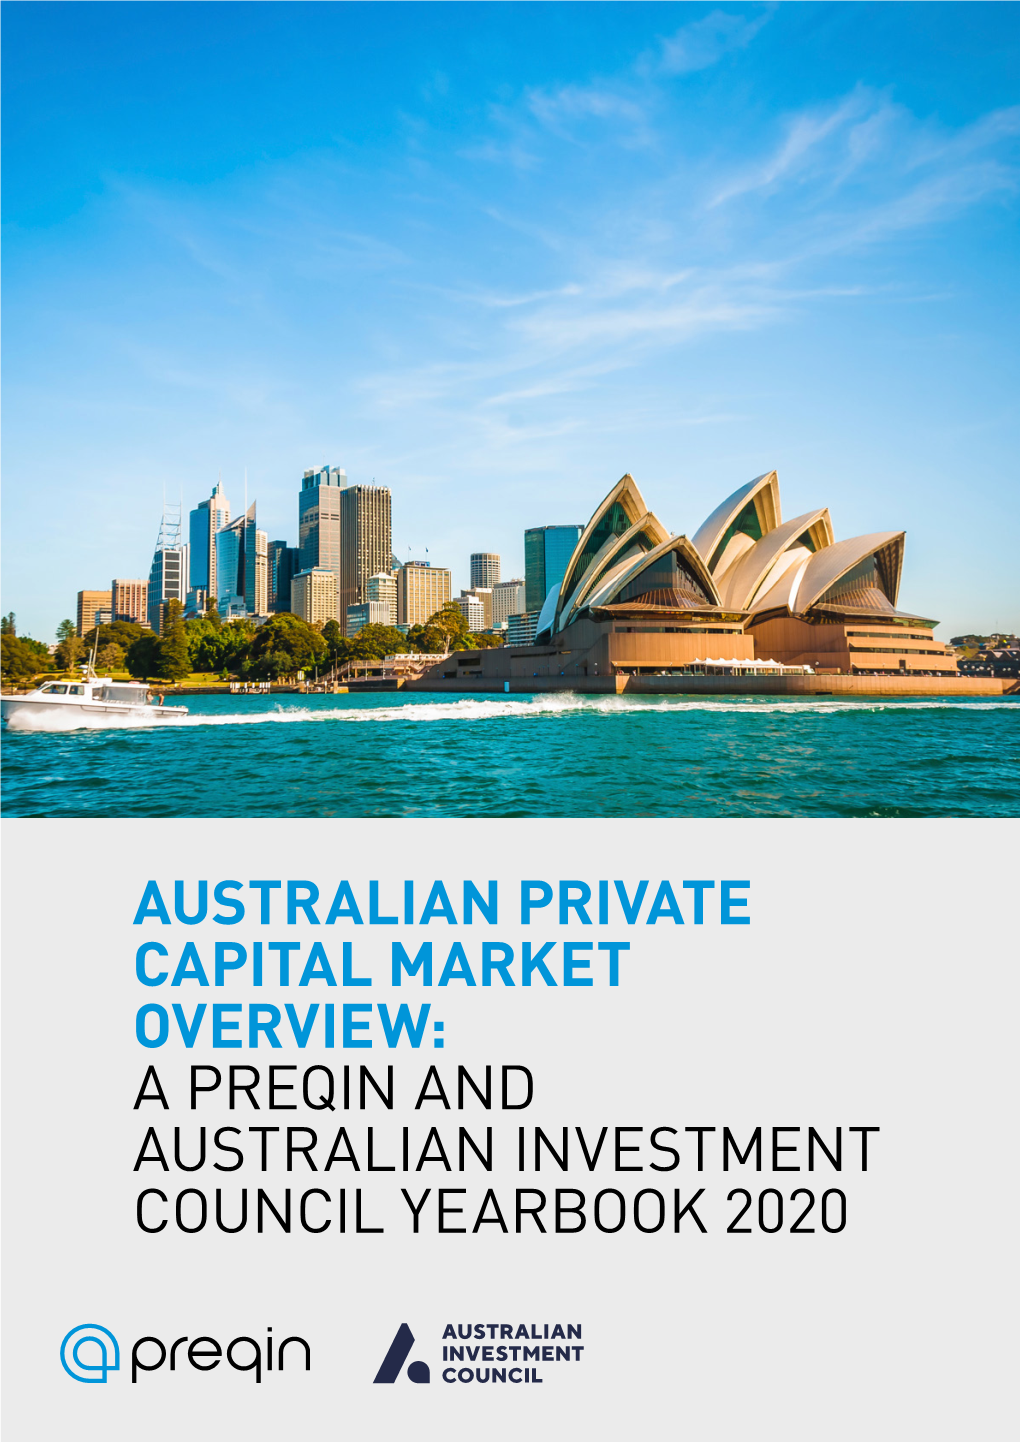 Preqin and Australian Investment Council Yearbook 2020